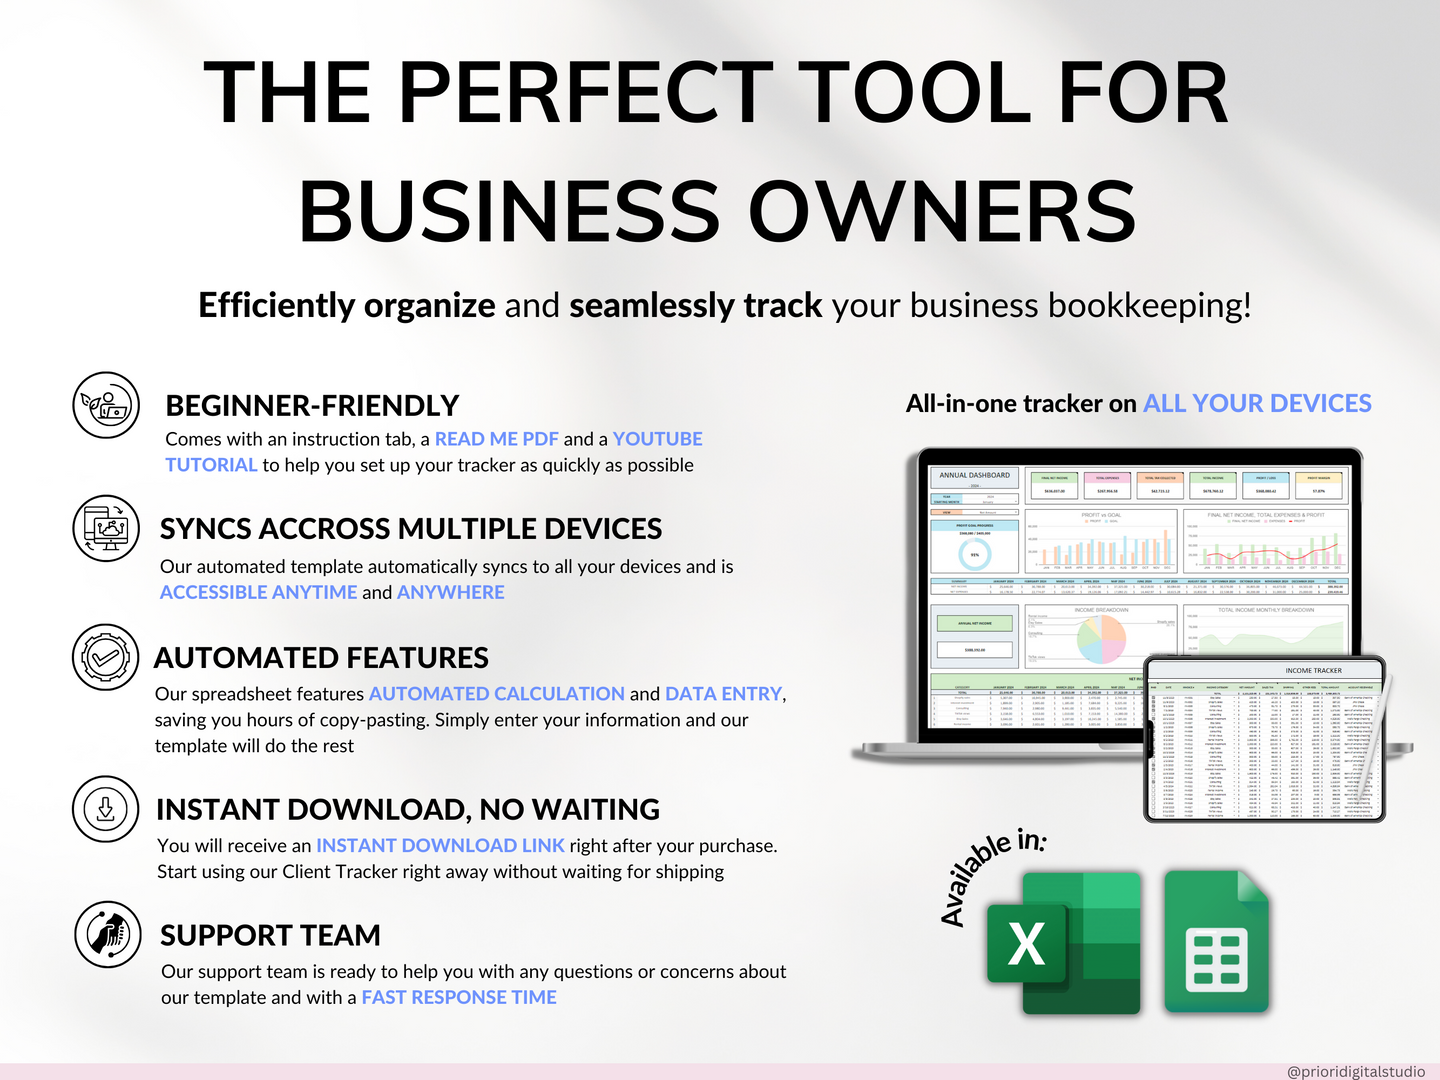 Small Business Bookkeeping Spreadsheet Income Expense Tracker Tax Tracker Accounting Template Mileage Tracker Business Planner Profit & Loss